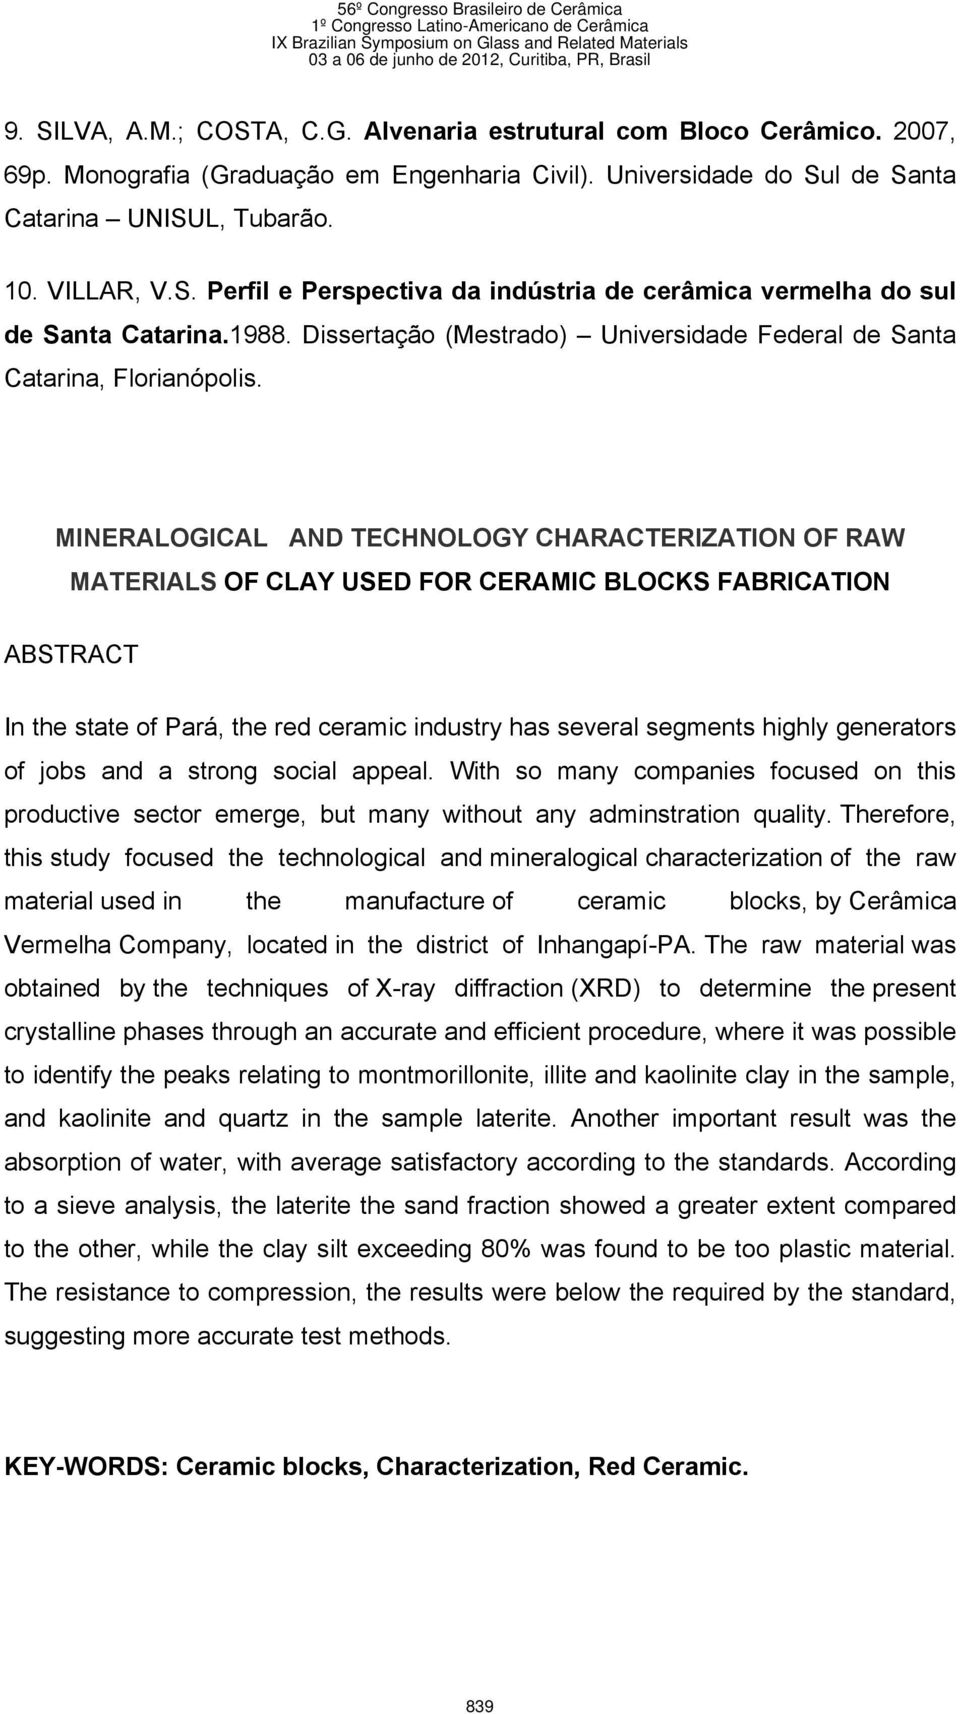 MINERALOGICAL AND TECHNOLOGY CHARACTERIZATION OF RAW MATERIALS OF CLAY USED FOR CERAMIC BLOCKS FABRICATION ABSTRACT In the state of Pará, the red ceramic industry has several segments highly